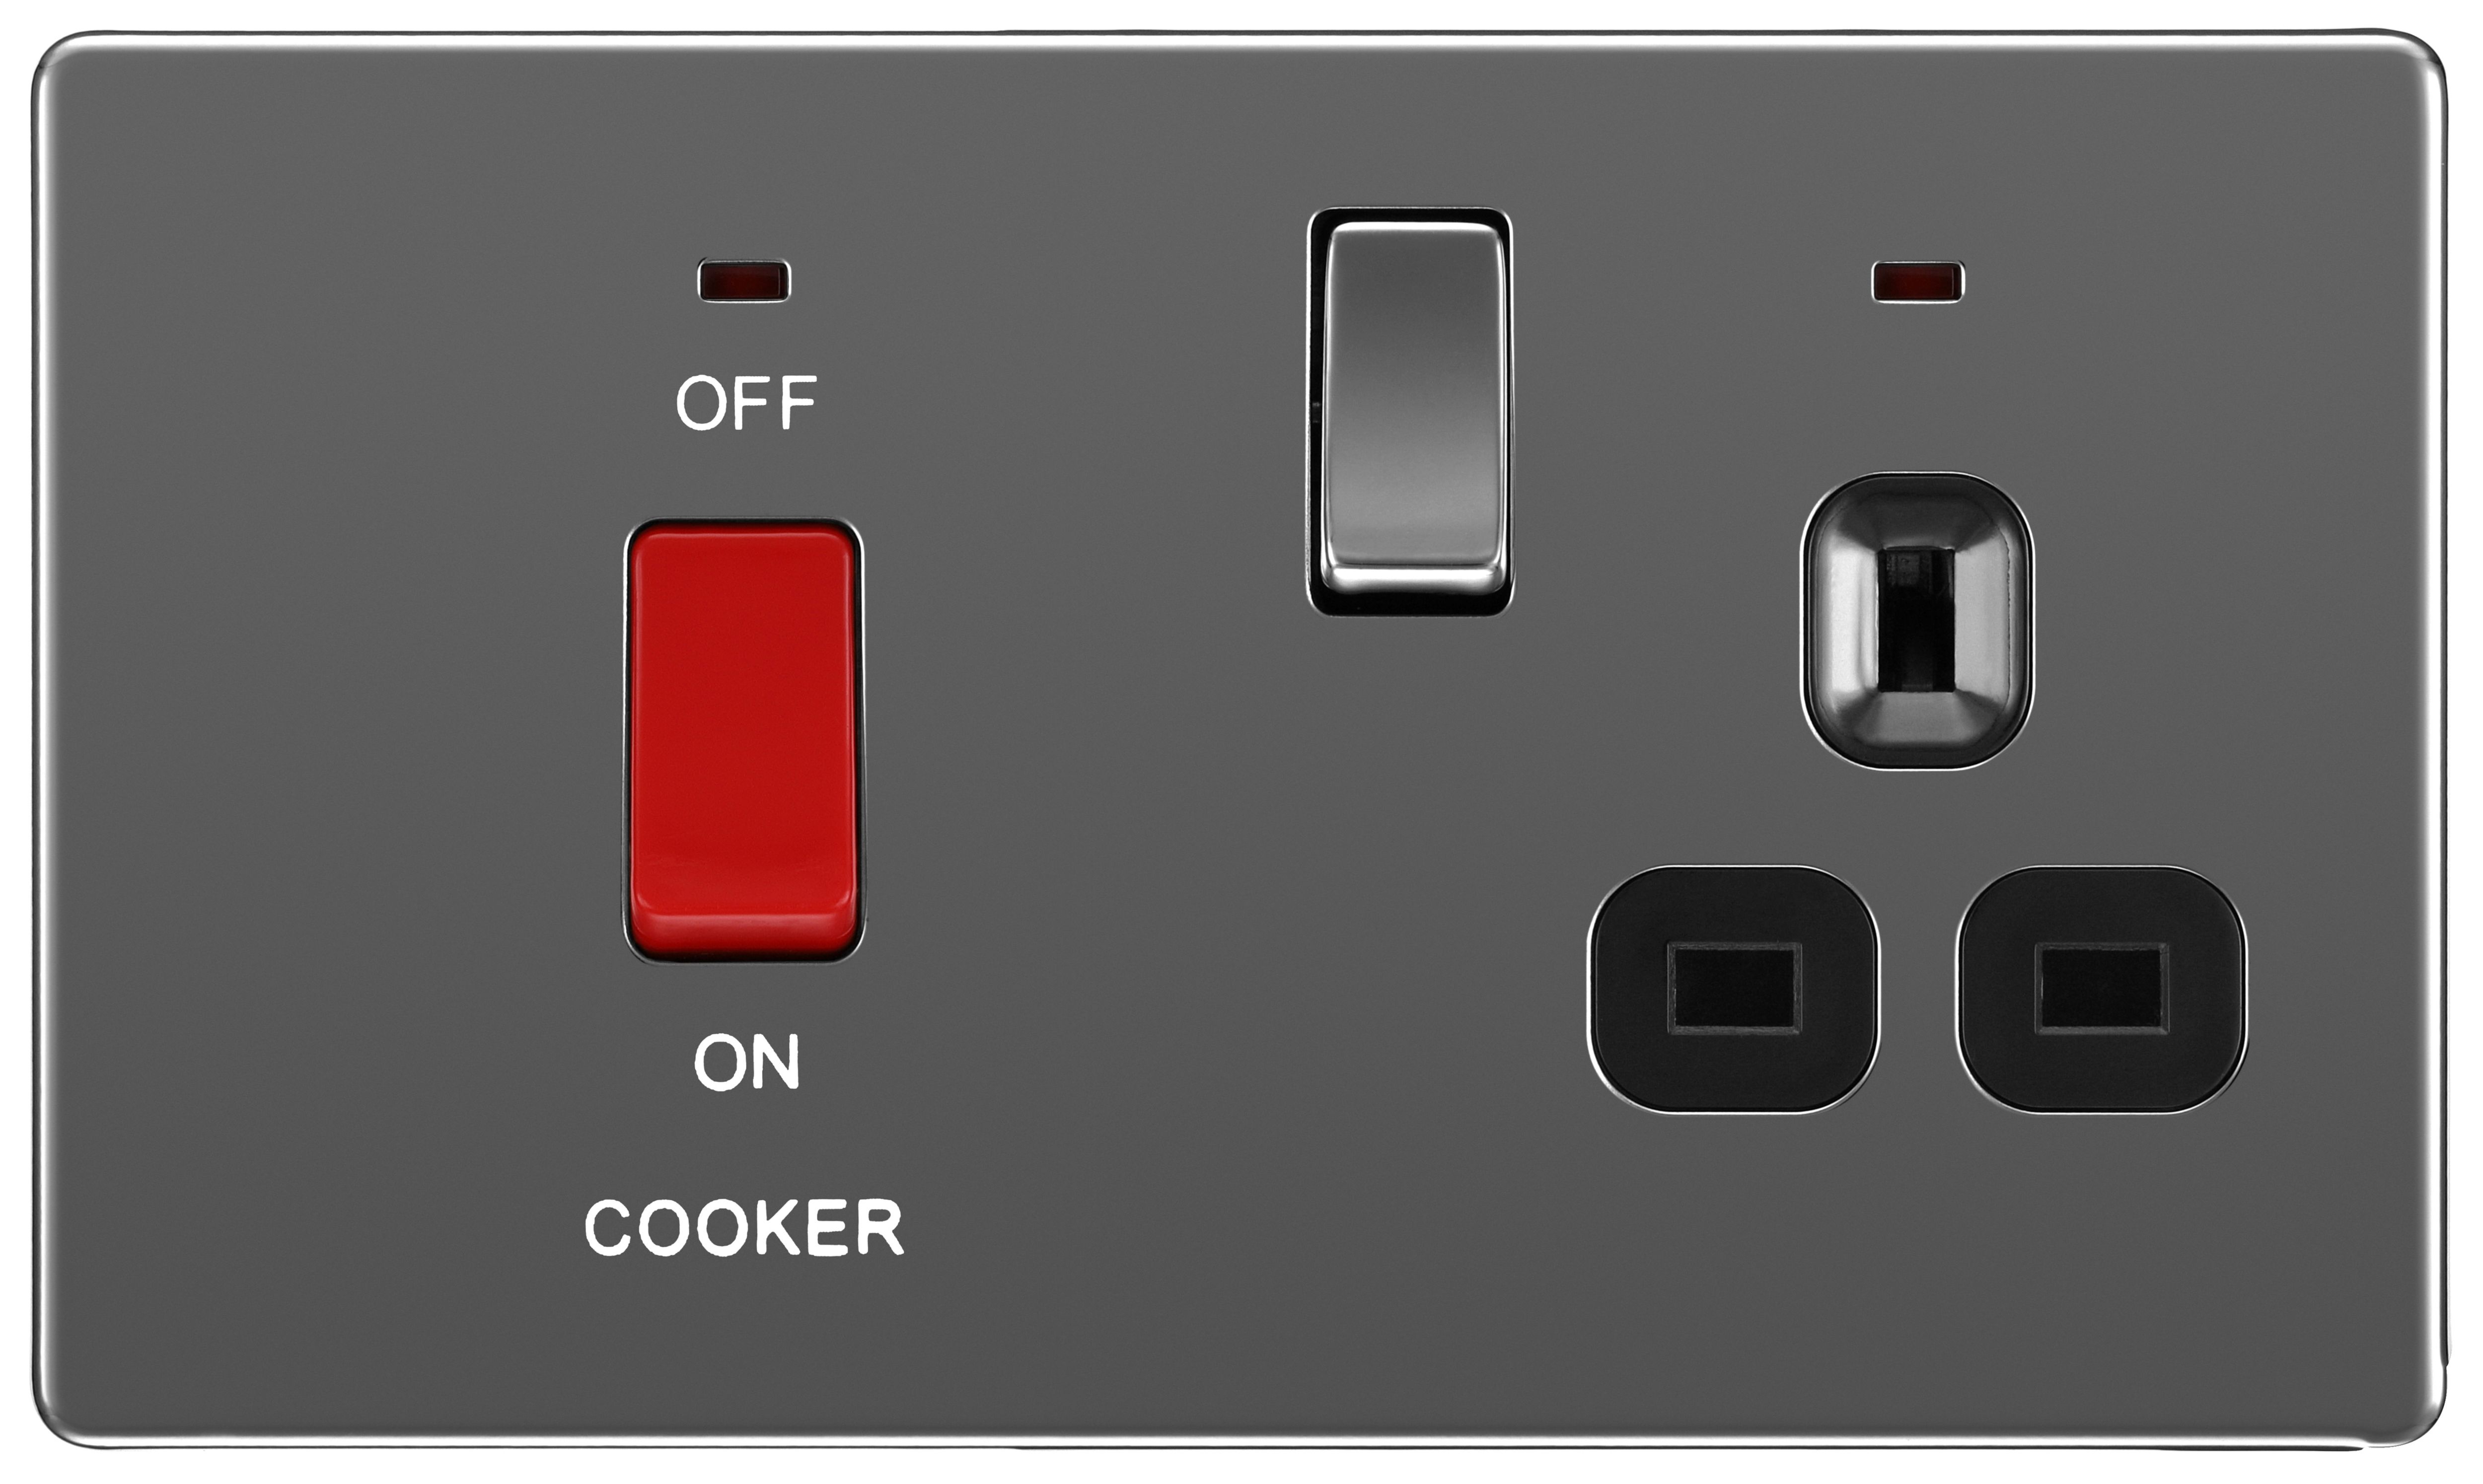 BG 45 Amp Screwless Flat Plate Cooker Control Unit with Switched 13 Amp Power Socket Includes Power Indicators - Black Nickel